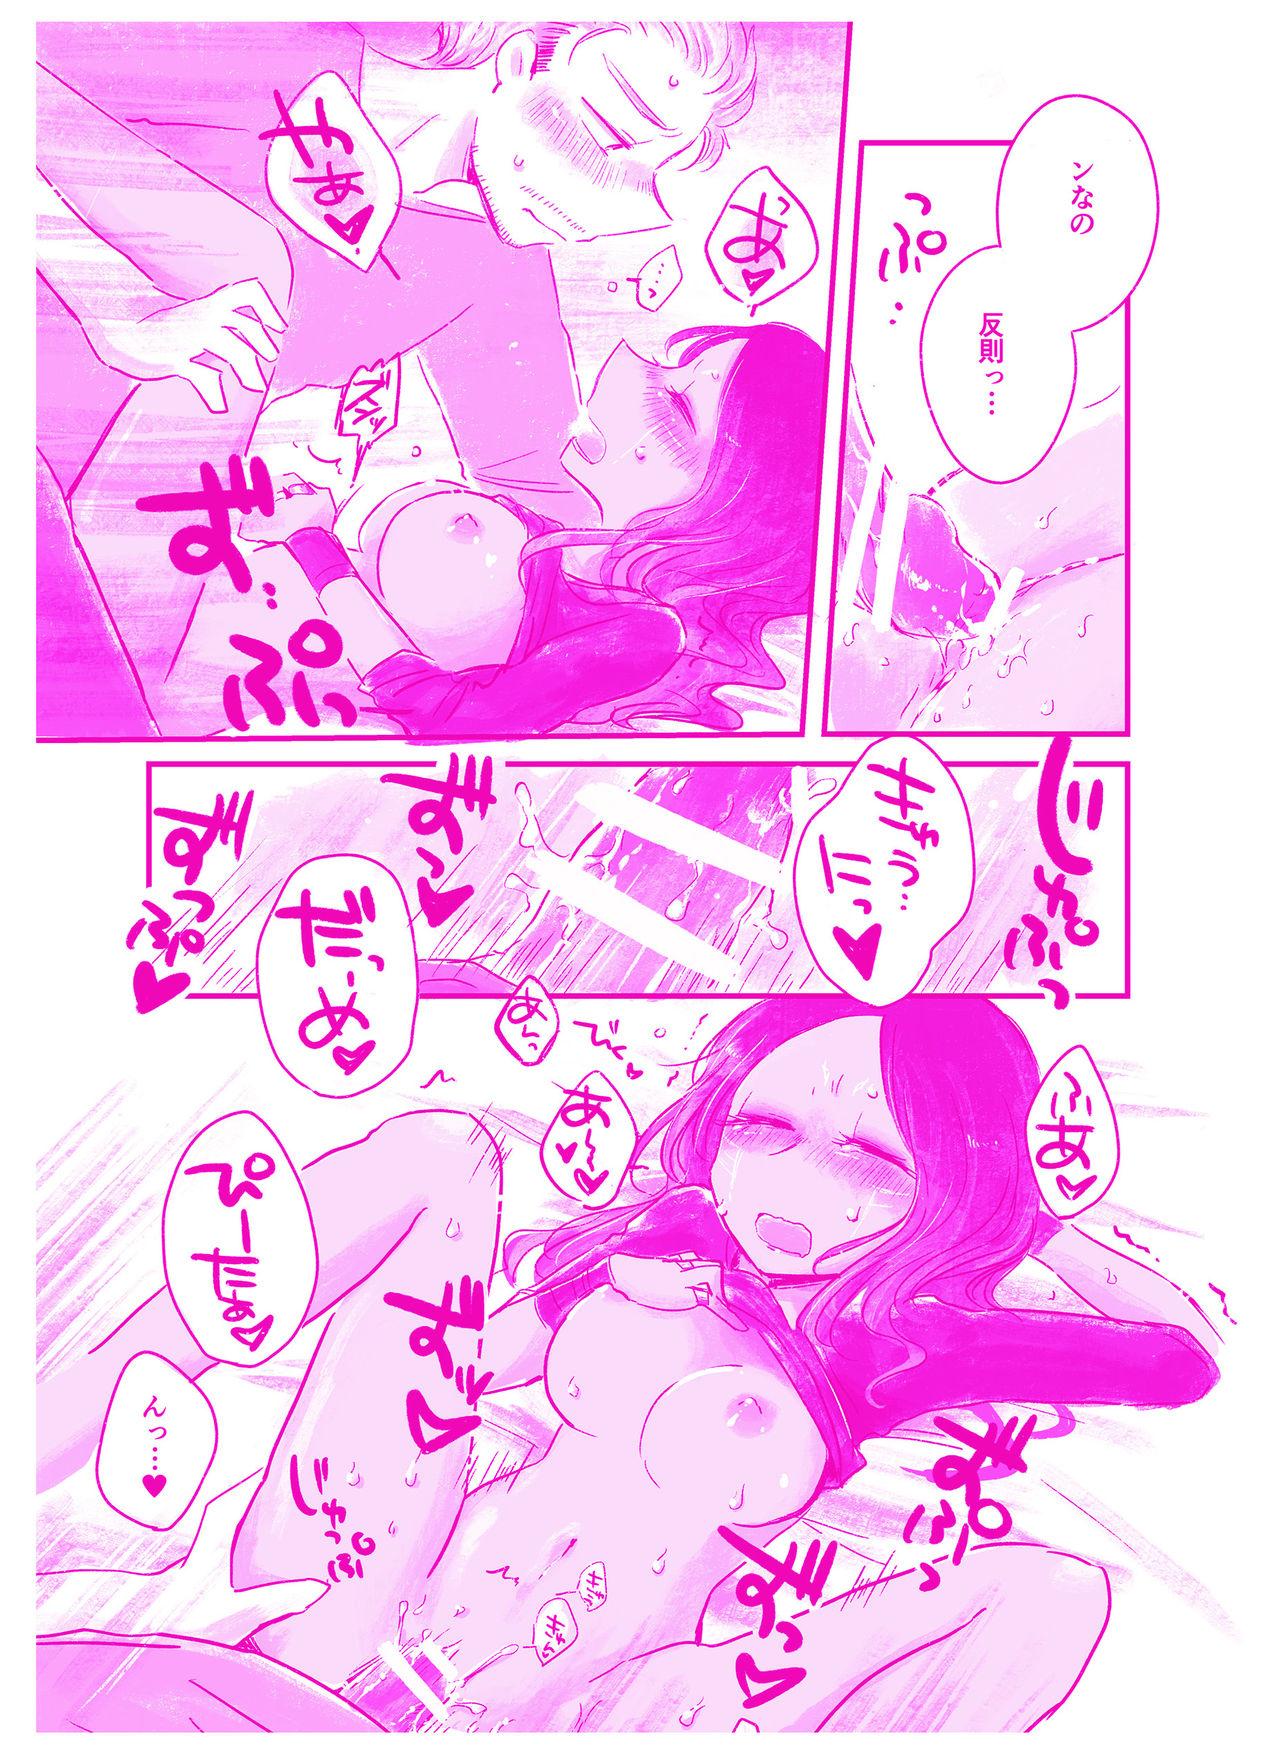 Huge Dick 言われてみてえもんだ - Guardians of the galaxy Amatuer Porn - Page 12